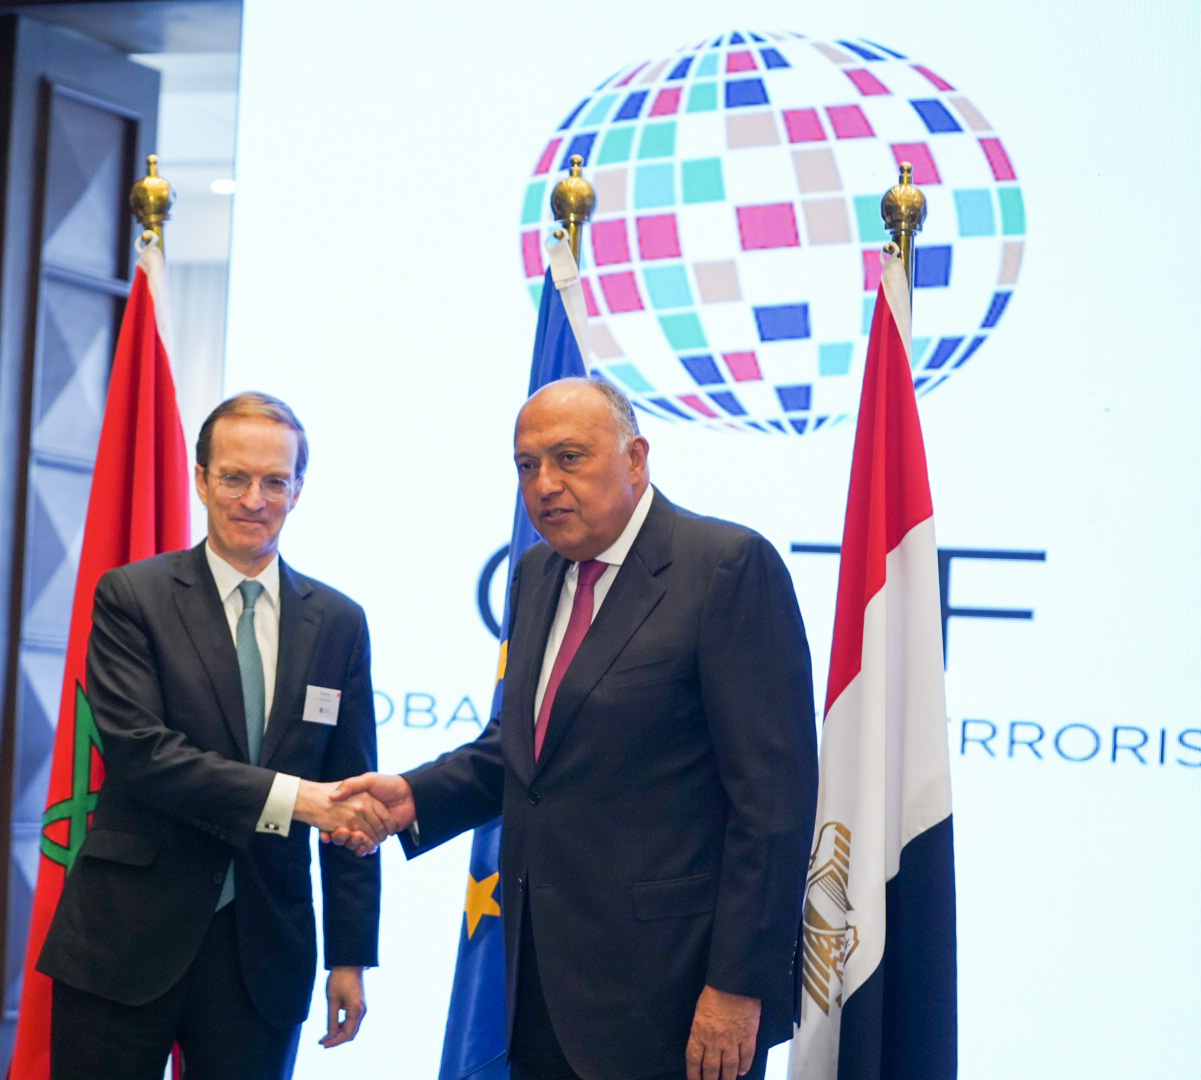 Egypt takes over from Morocco co-presidency of Global Counterterrorism Forum, triggers criticism